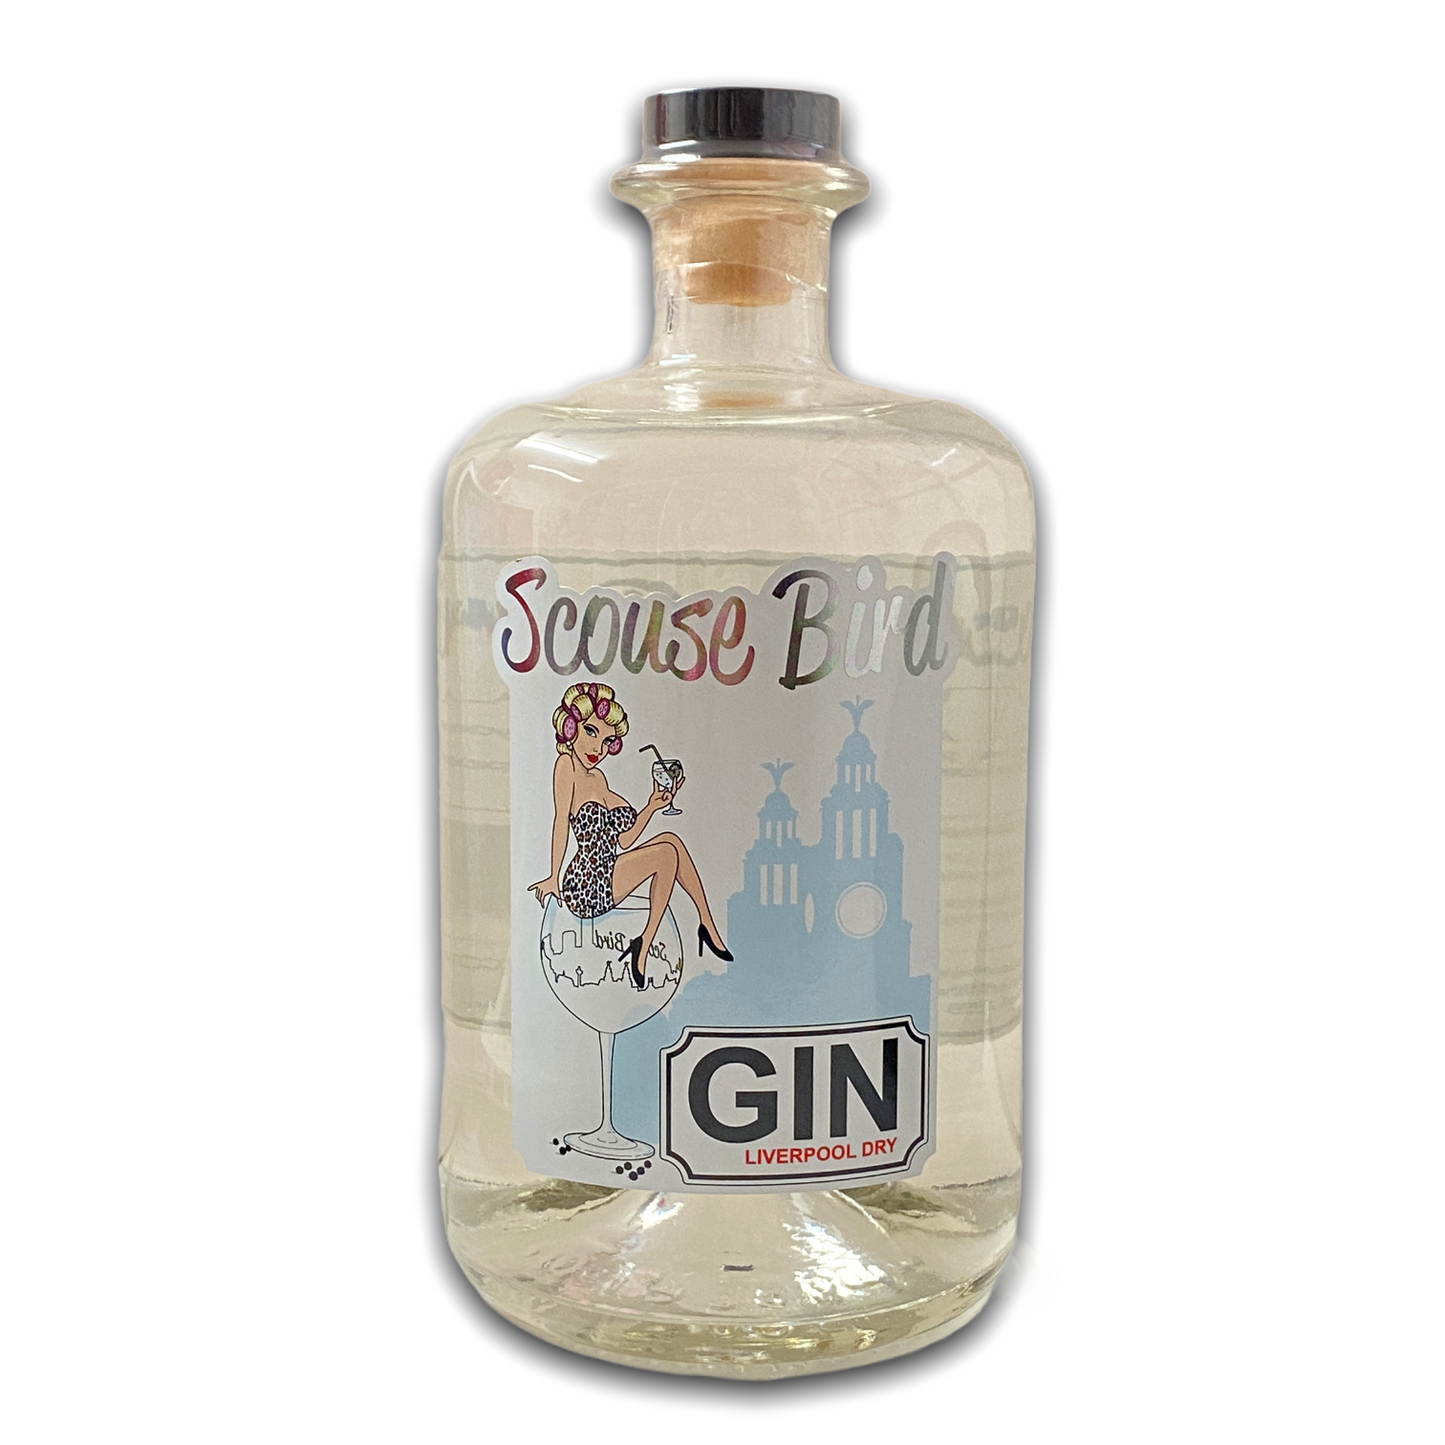 Scouse Bird Liverpool Dry Gin 70cl